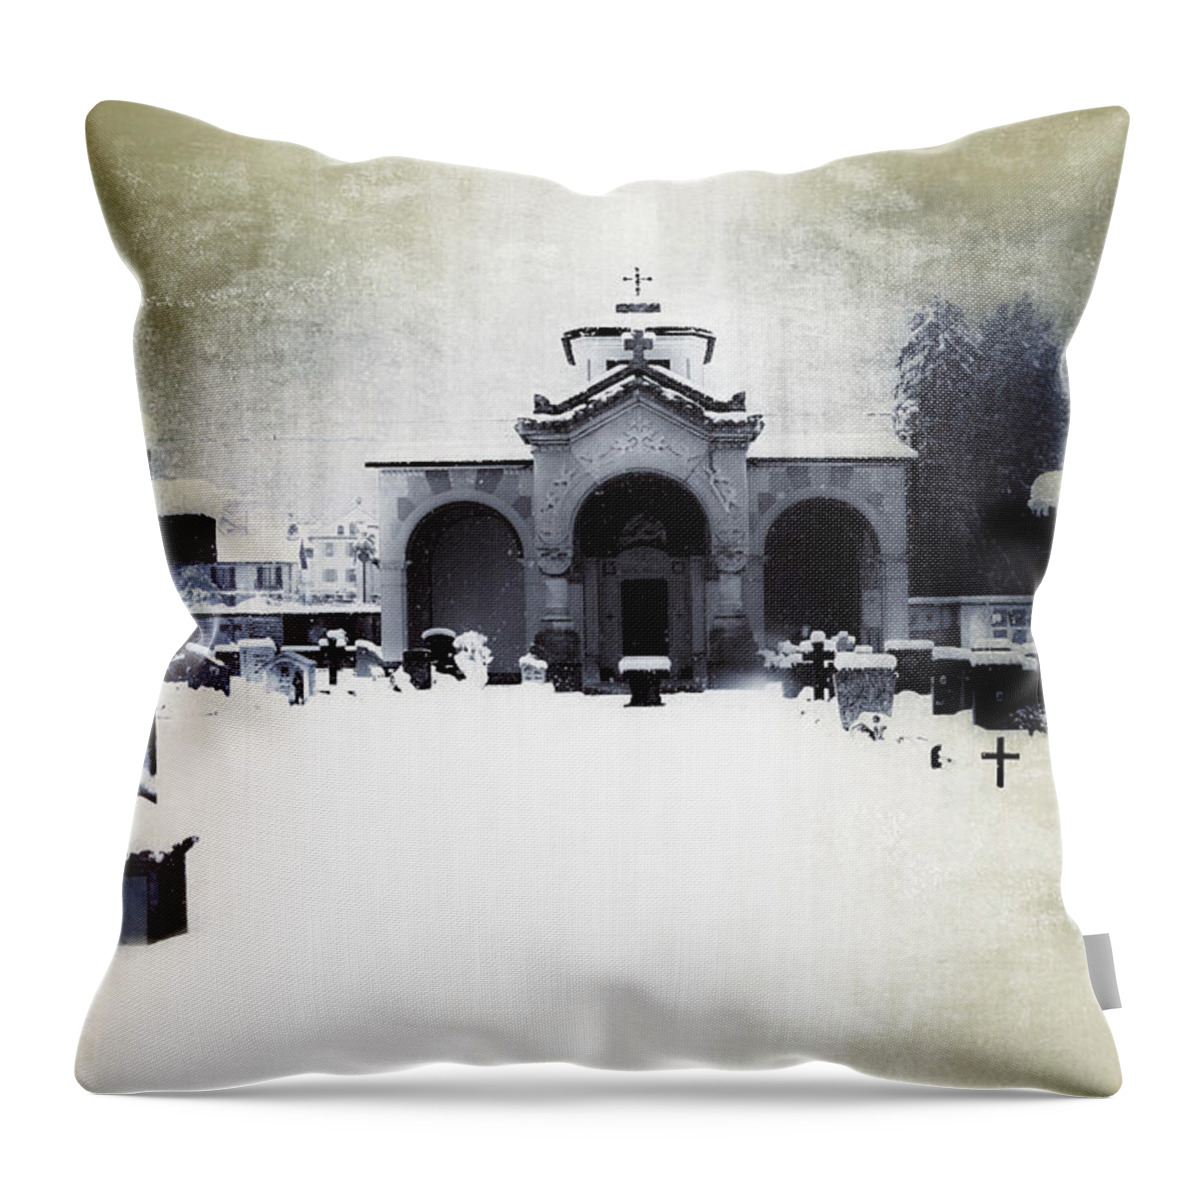 Cemetery Throw Pillow featuring the photograph Cemetery by Joana Kruse